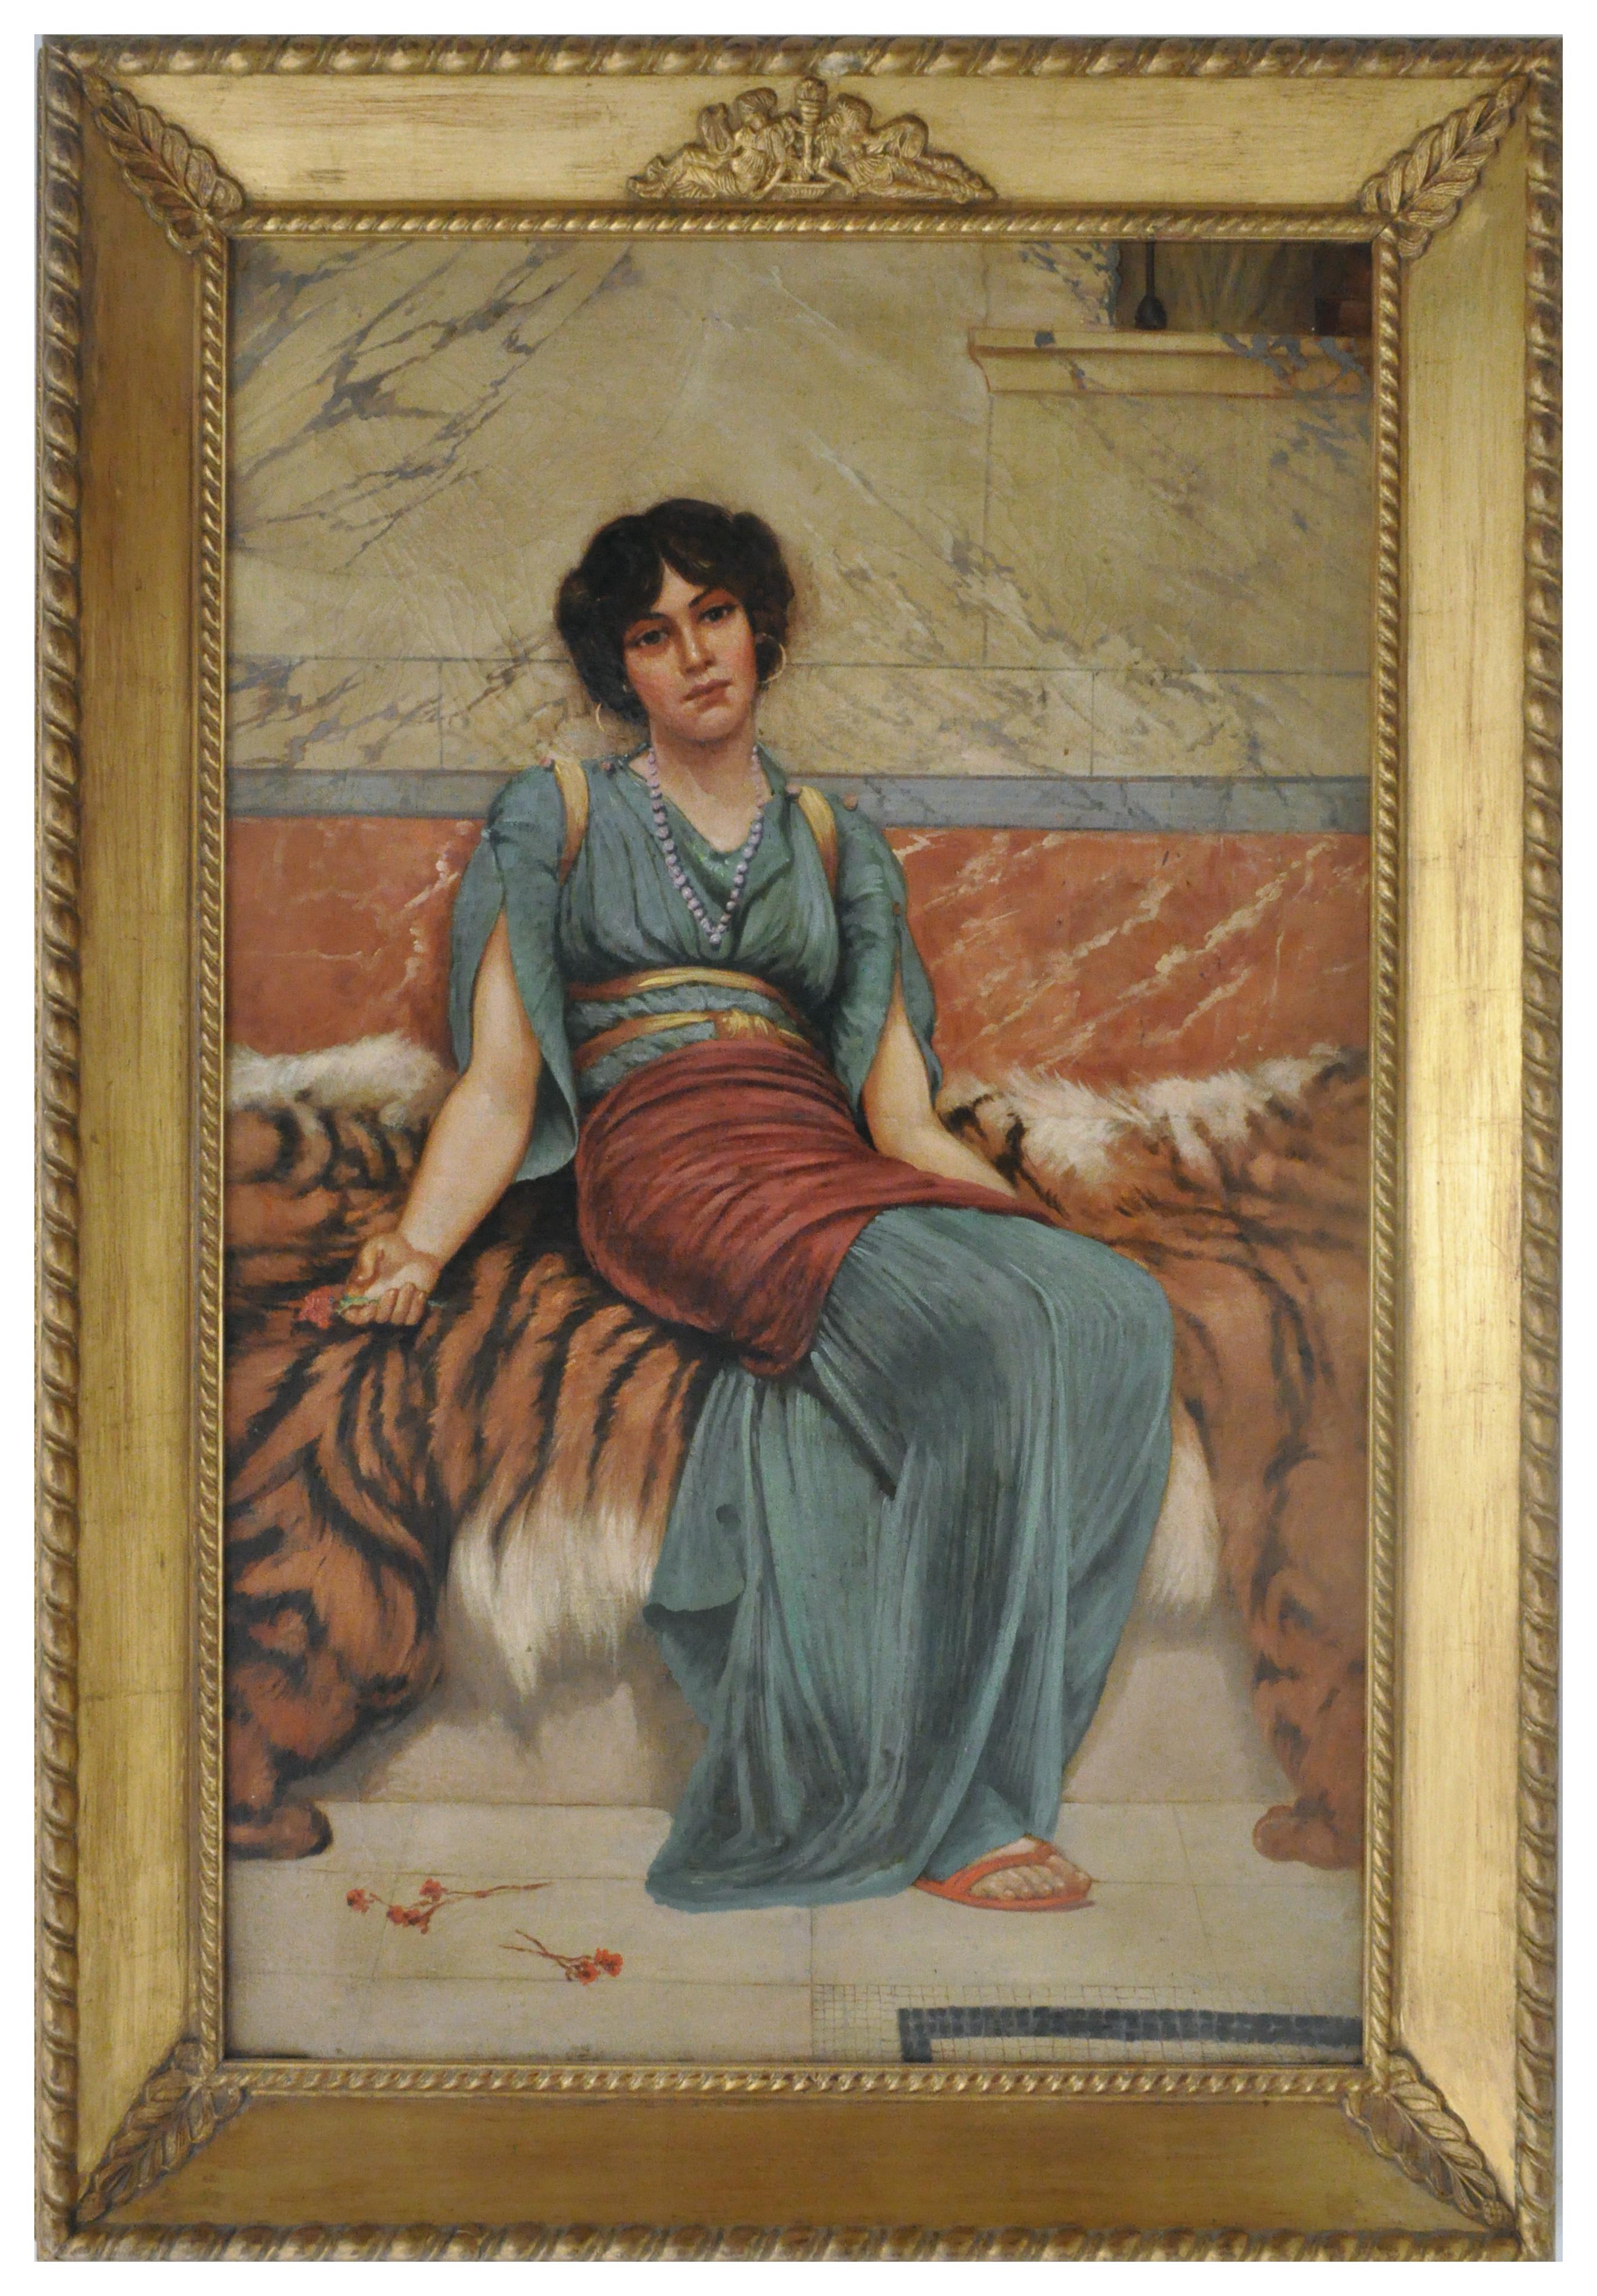 Eugenio De Blasi Figurative Painting - NEOCLASSICAL FIGURE -In theManner of J. W. Godward Italy  Oil on canvas painting